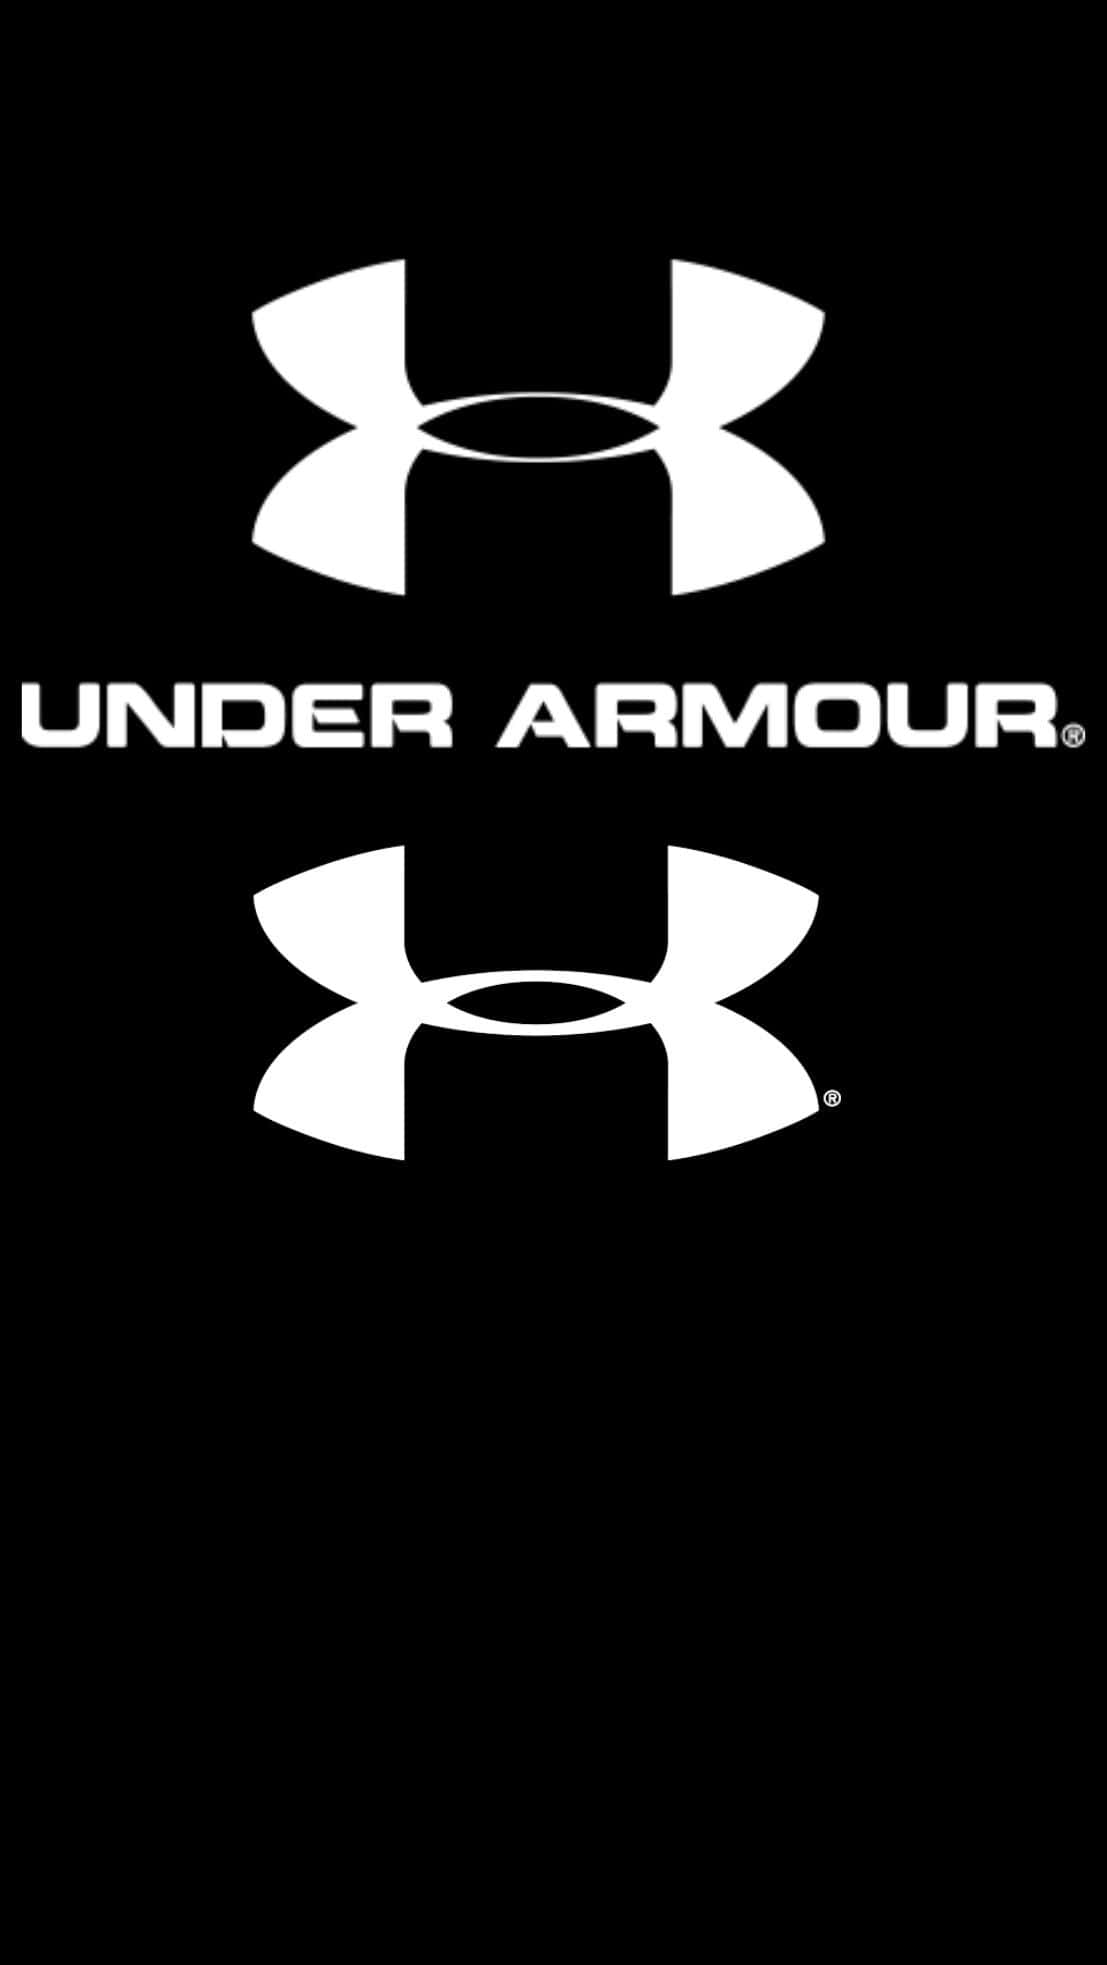 Catch the latest Under Armour products - great for hitting the gym or hitting the streets.